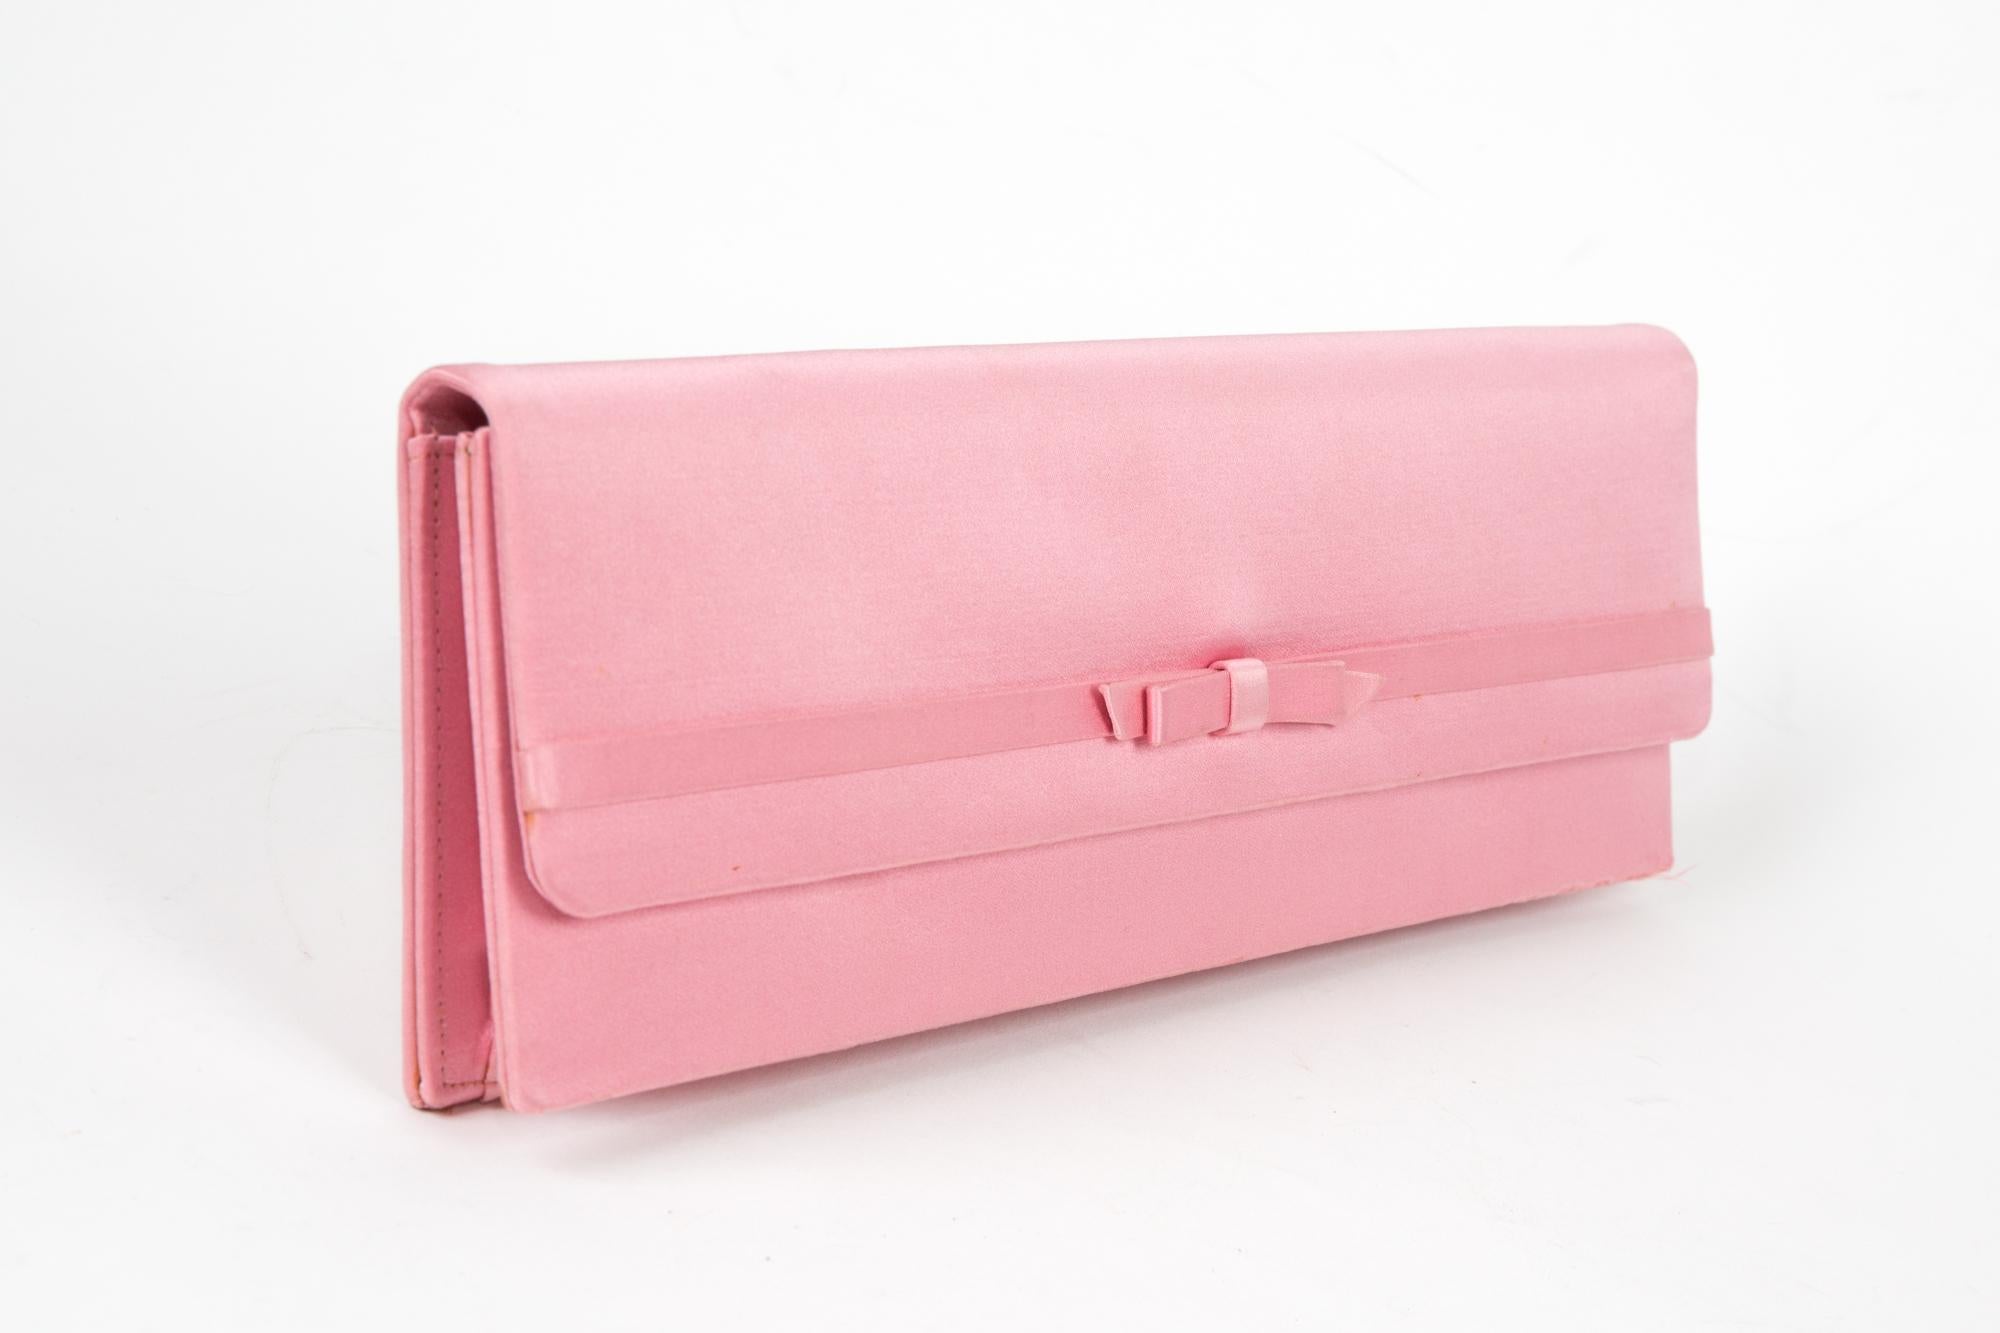 Jacques Fath pink silk clutch bag featuring a long shape, two snaps opening, inside small pocket.
Length 13.7in. (35cm)
Height: 3.5in. (9cm)
Width:1.18in. (3cm) 
In good vintage condition.  Made in France.
Please note this item is in good condition